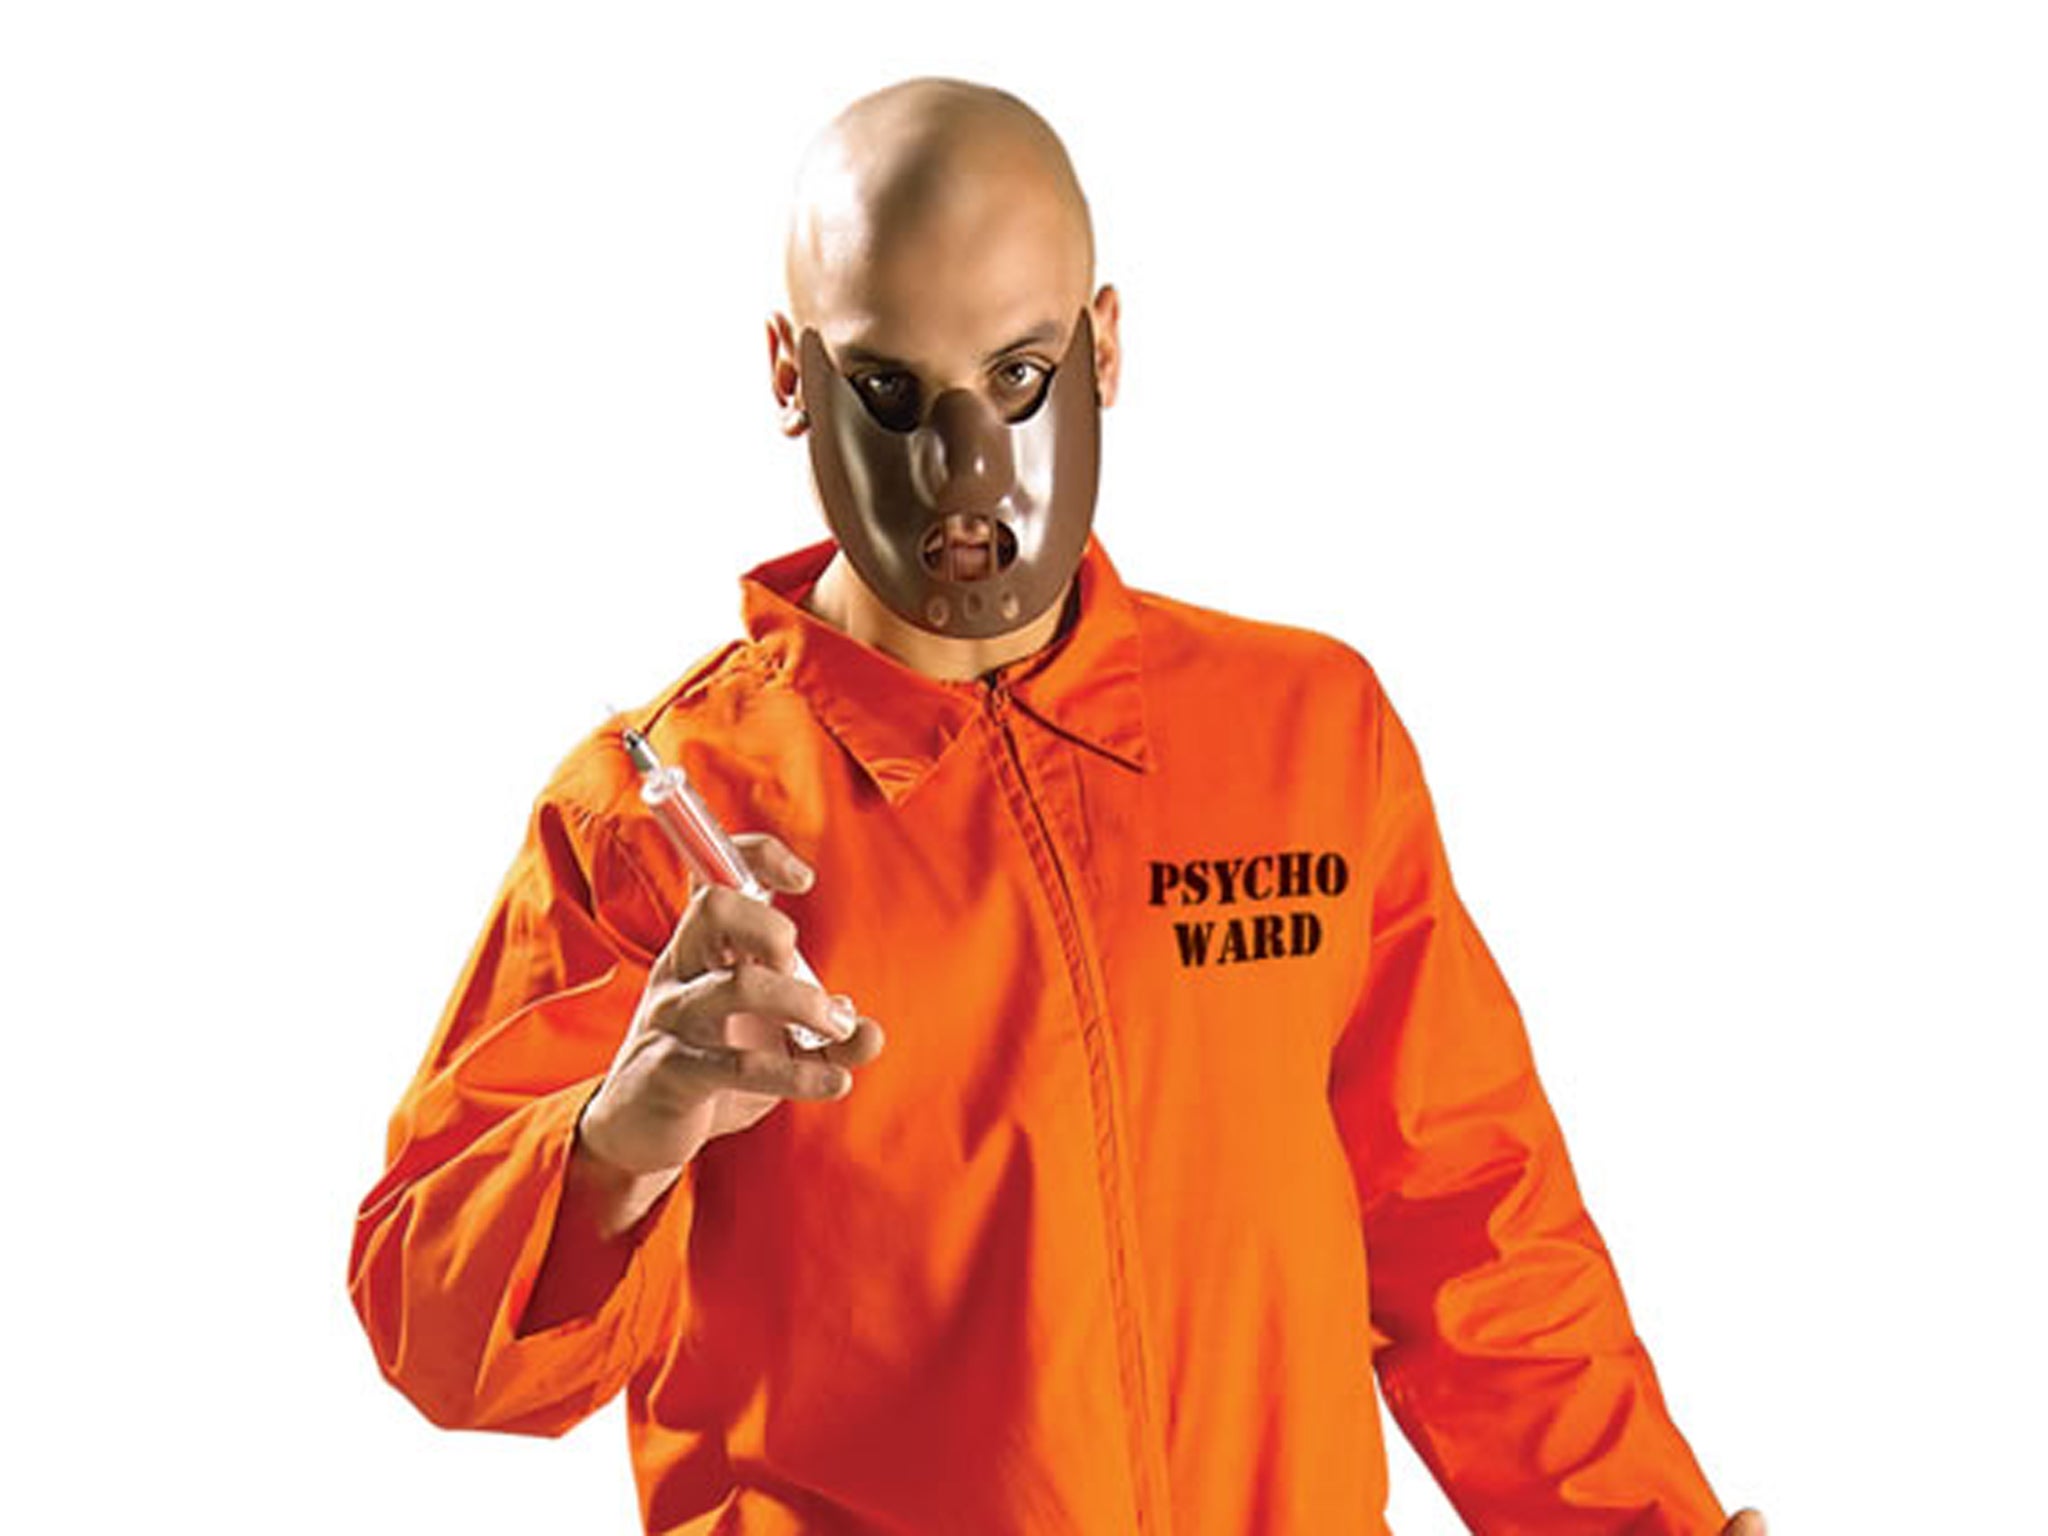 The Psycho Ward costume that Tesco has removed from its website